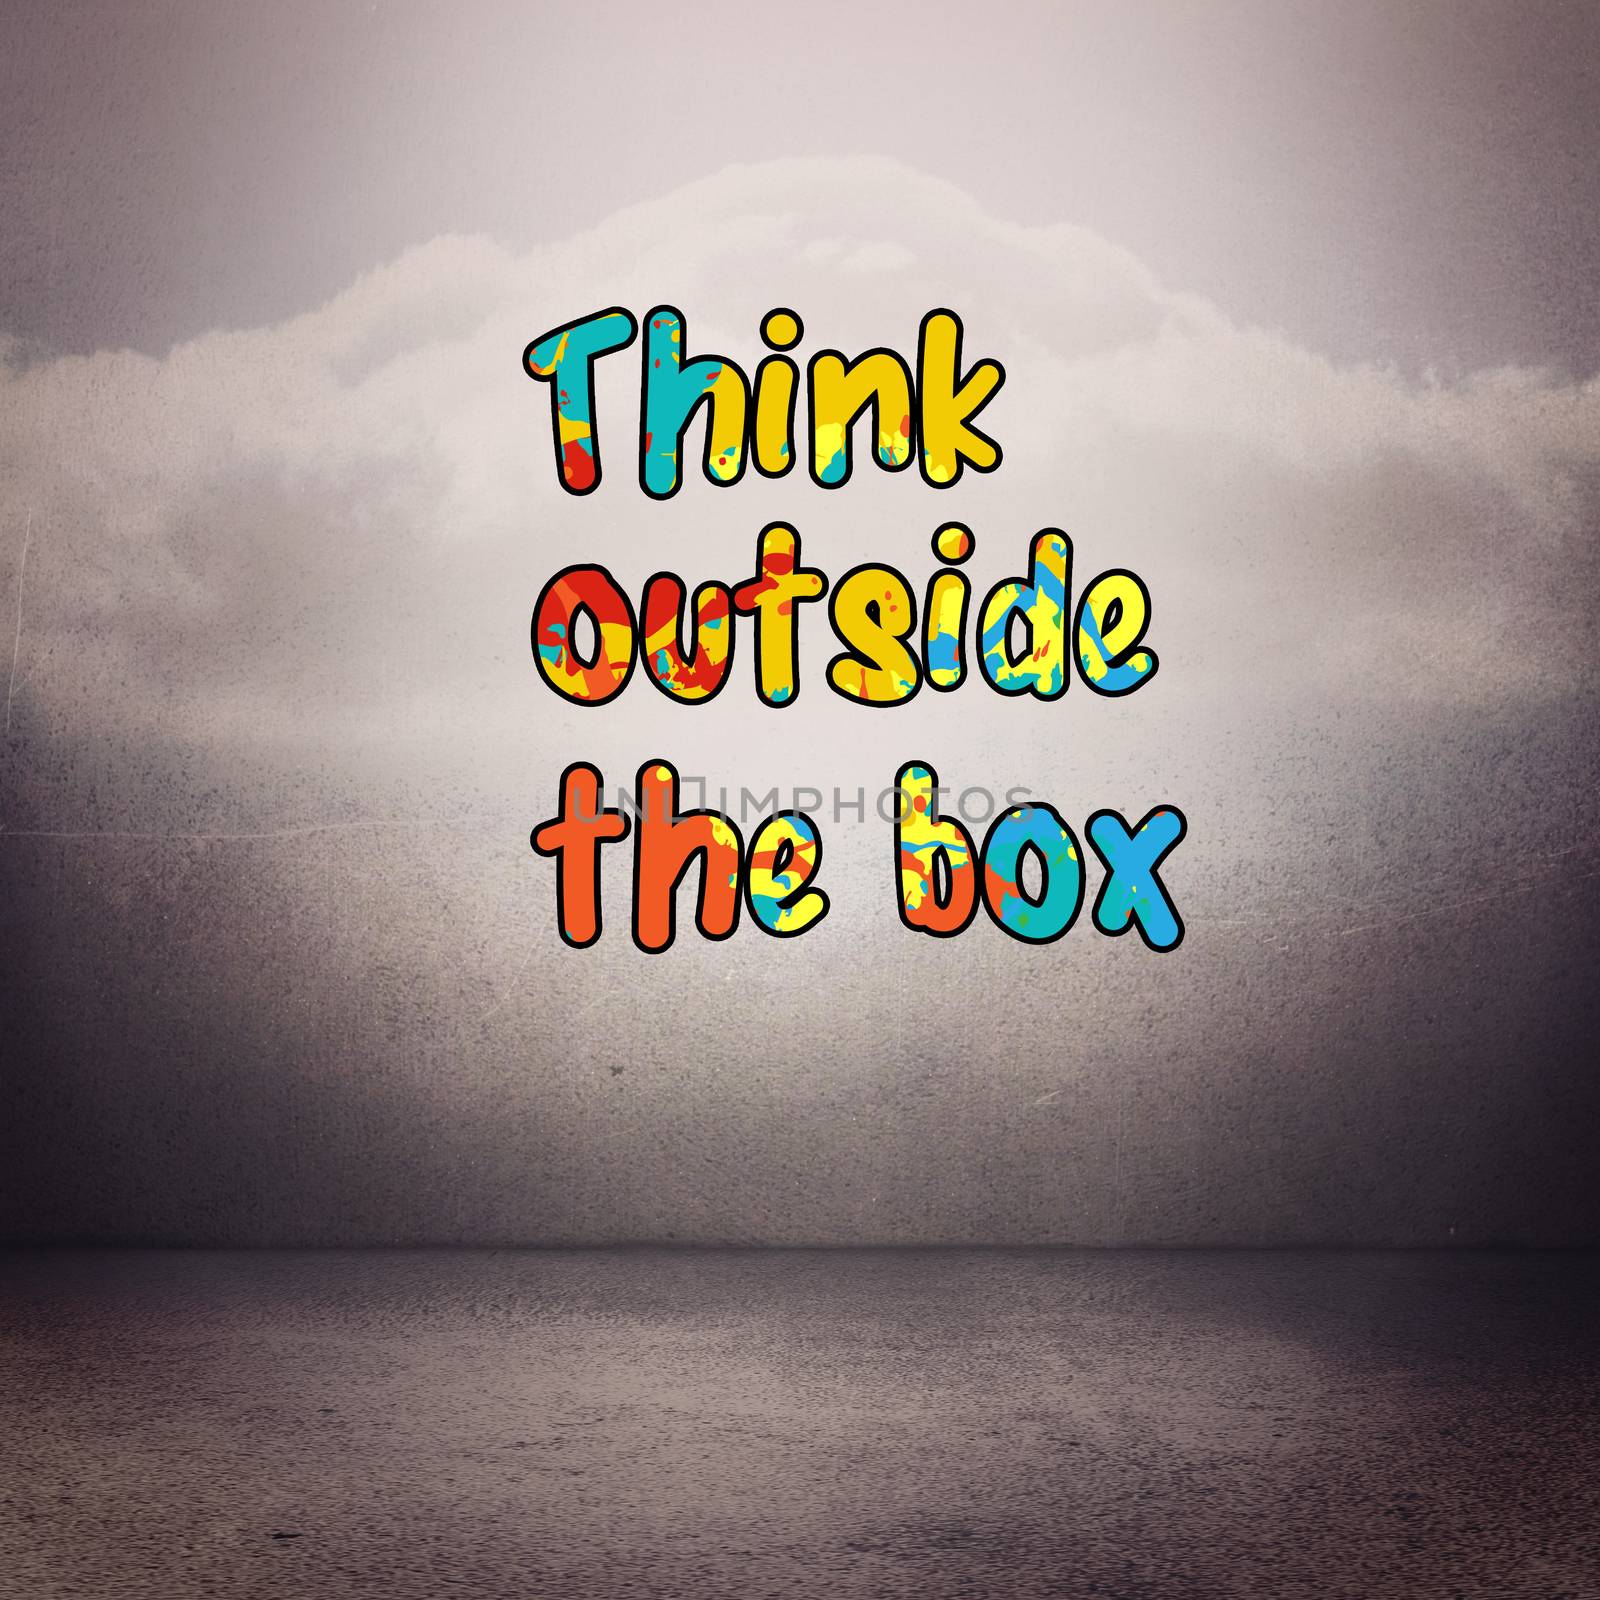 think outside the box against clouds in a room